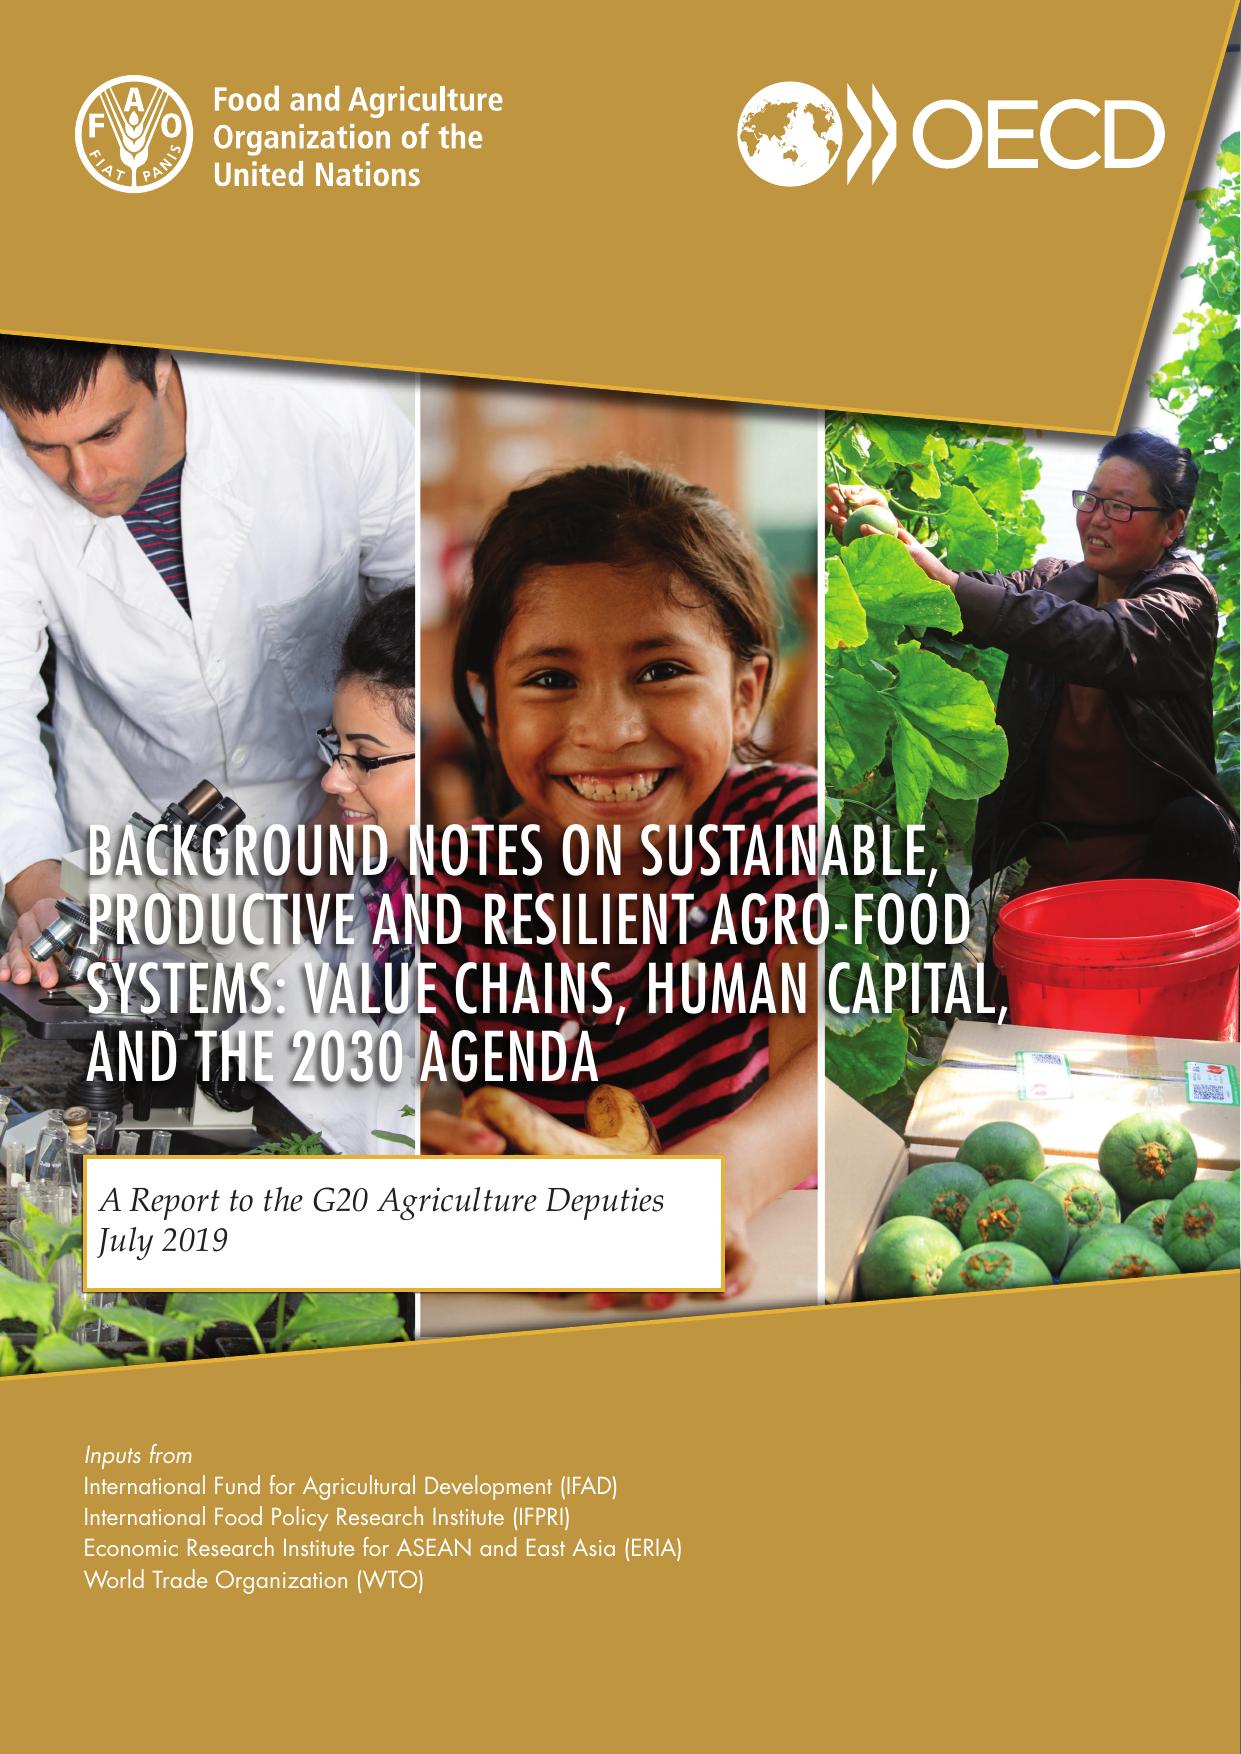 Background Notes on Sustainable, Productive and Resilient Agro-Food Systems Value chains, human capital, 2019